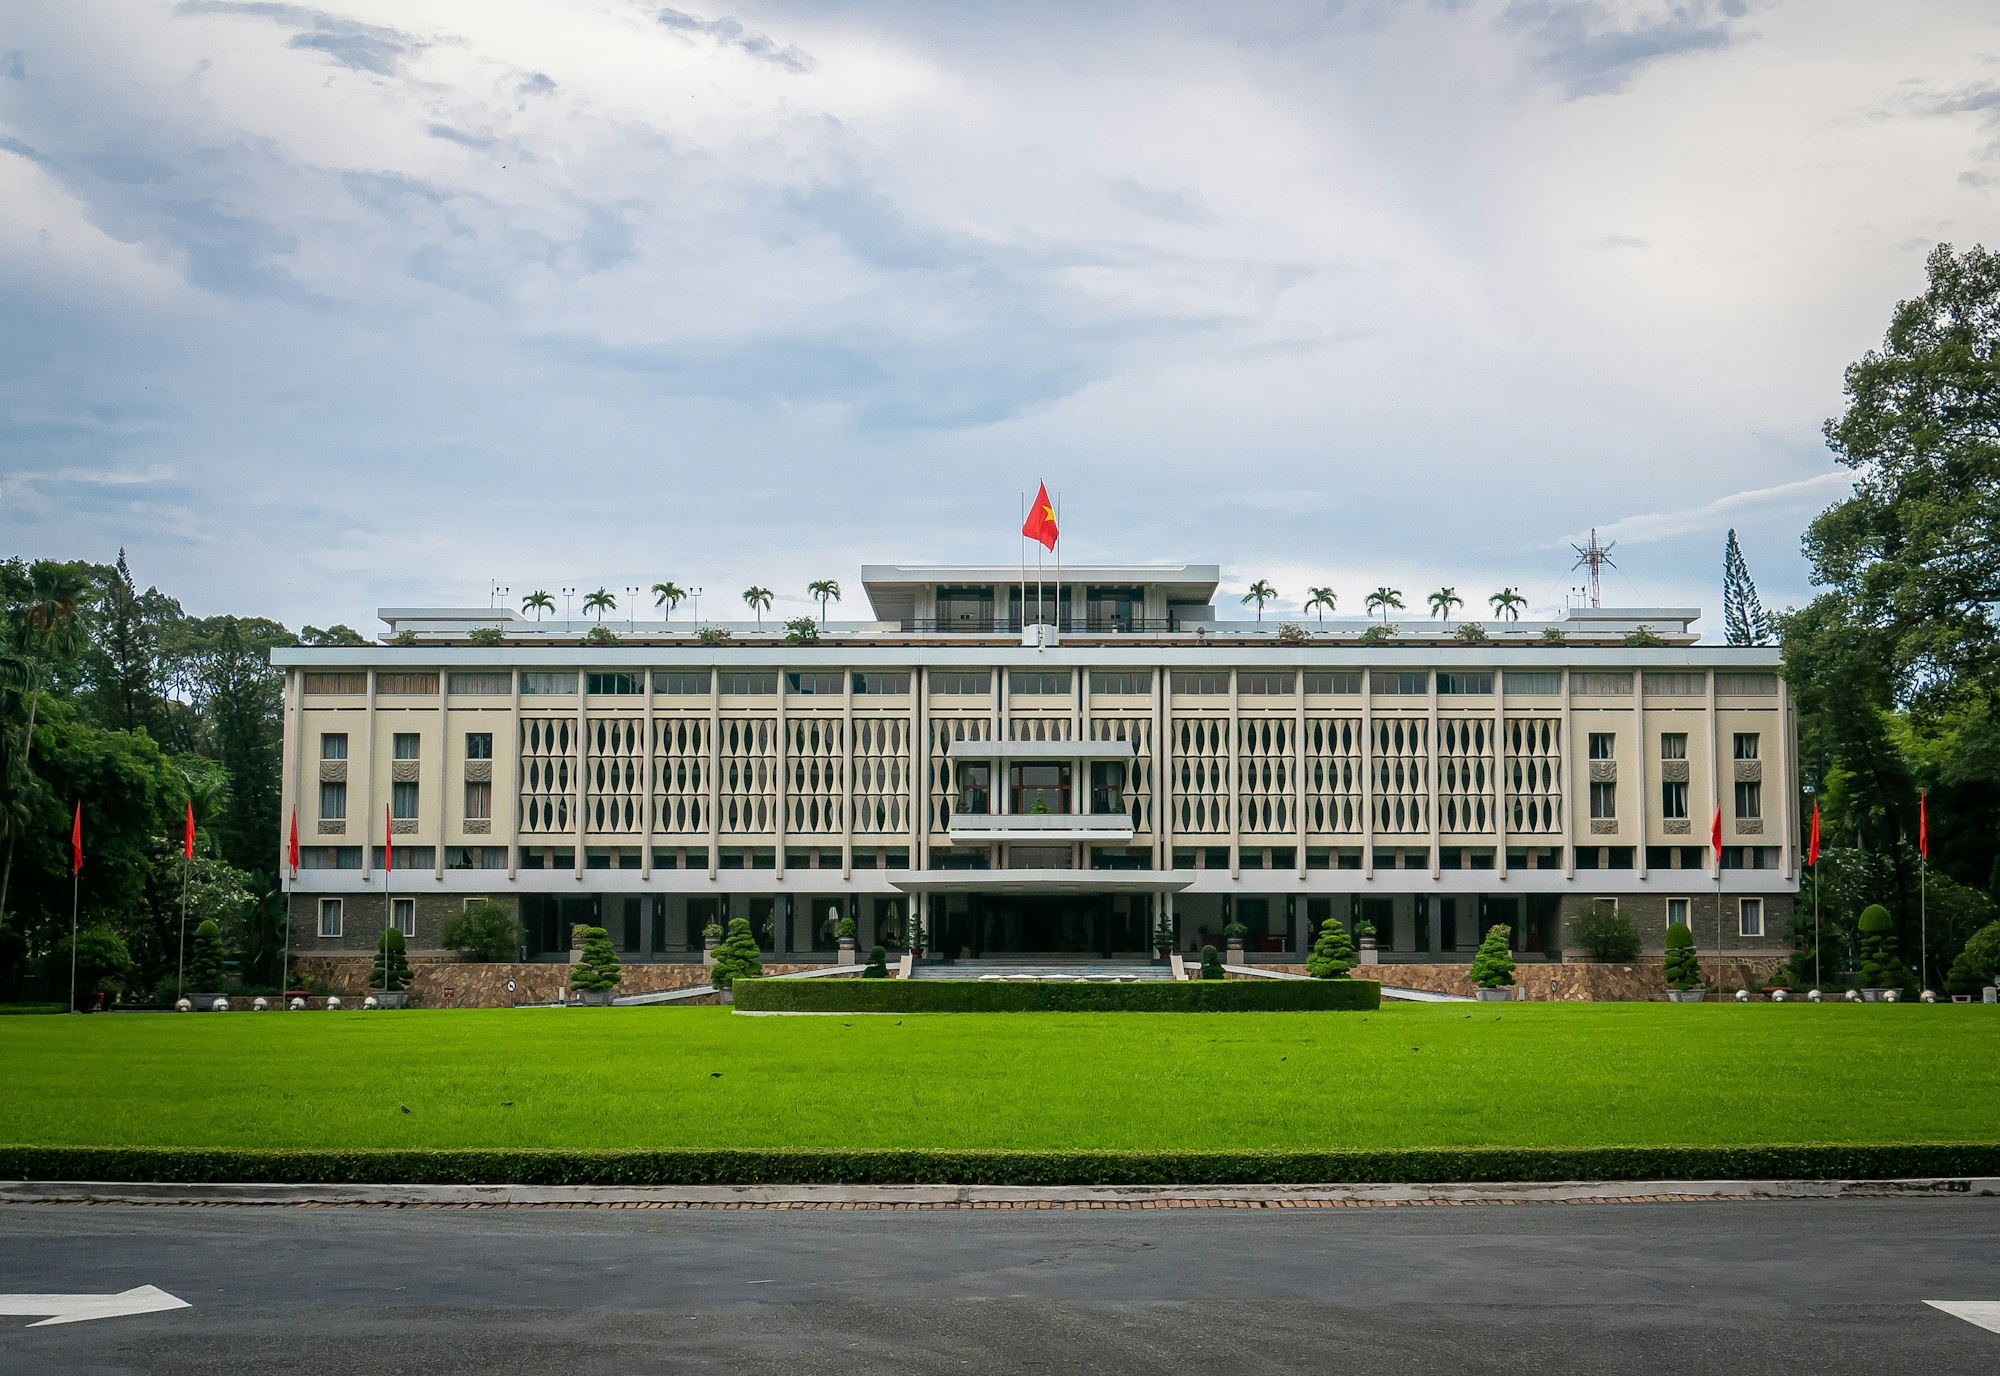 Independence Palace (Dinh Độc Lập), also known as Reunification Palace (Vietnamese: Dinh Thống Nhất), built on the site of the former Norodom Palace, is a landmark in Ho Chi Minh City (formerly known as Saigon), Vietnam. It was designed by architect Ngô Viết Thụ and was the home and workplace of the President of South Vietnam during the Vietnam War. It was the site of the end of the Vietnam War during the Fall of Saigon on 30 April 1975, when a North Vietnamese Army tank crashed through its gates.